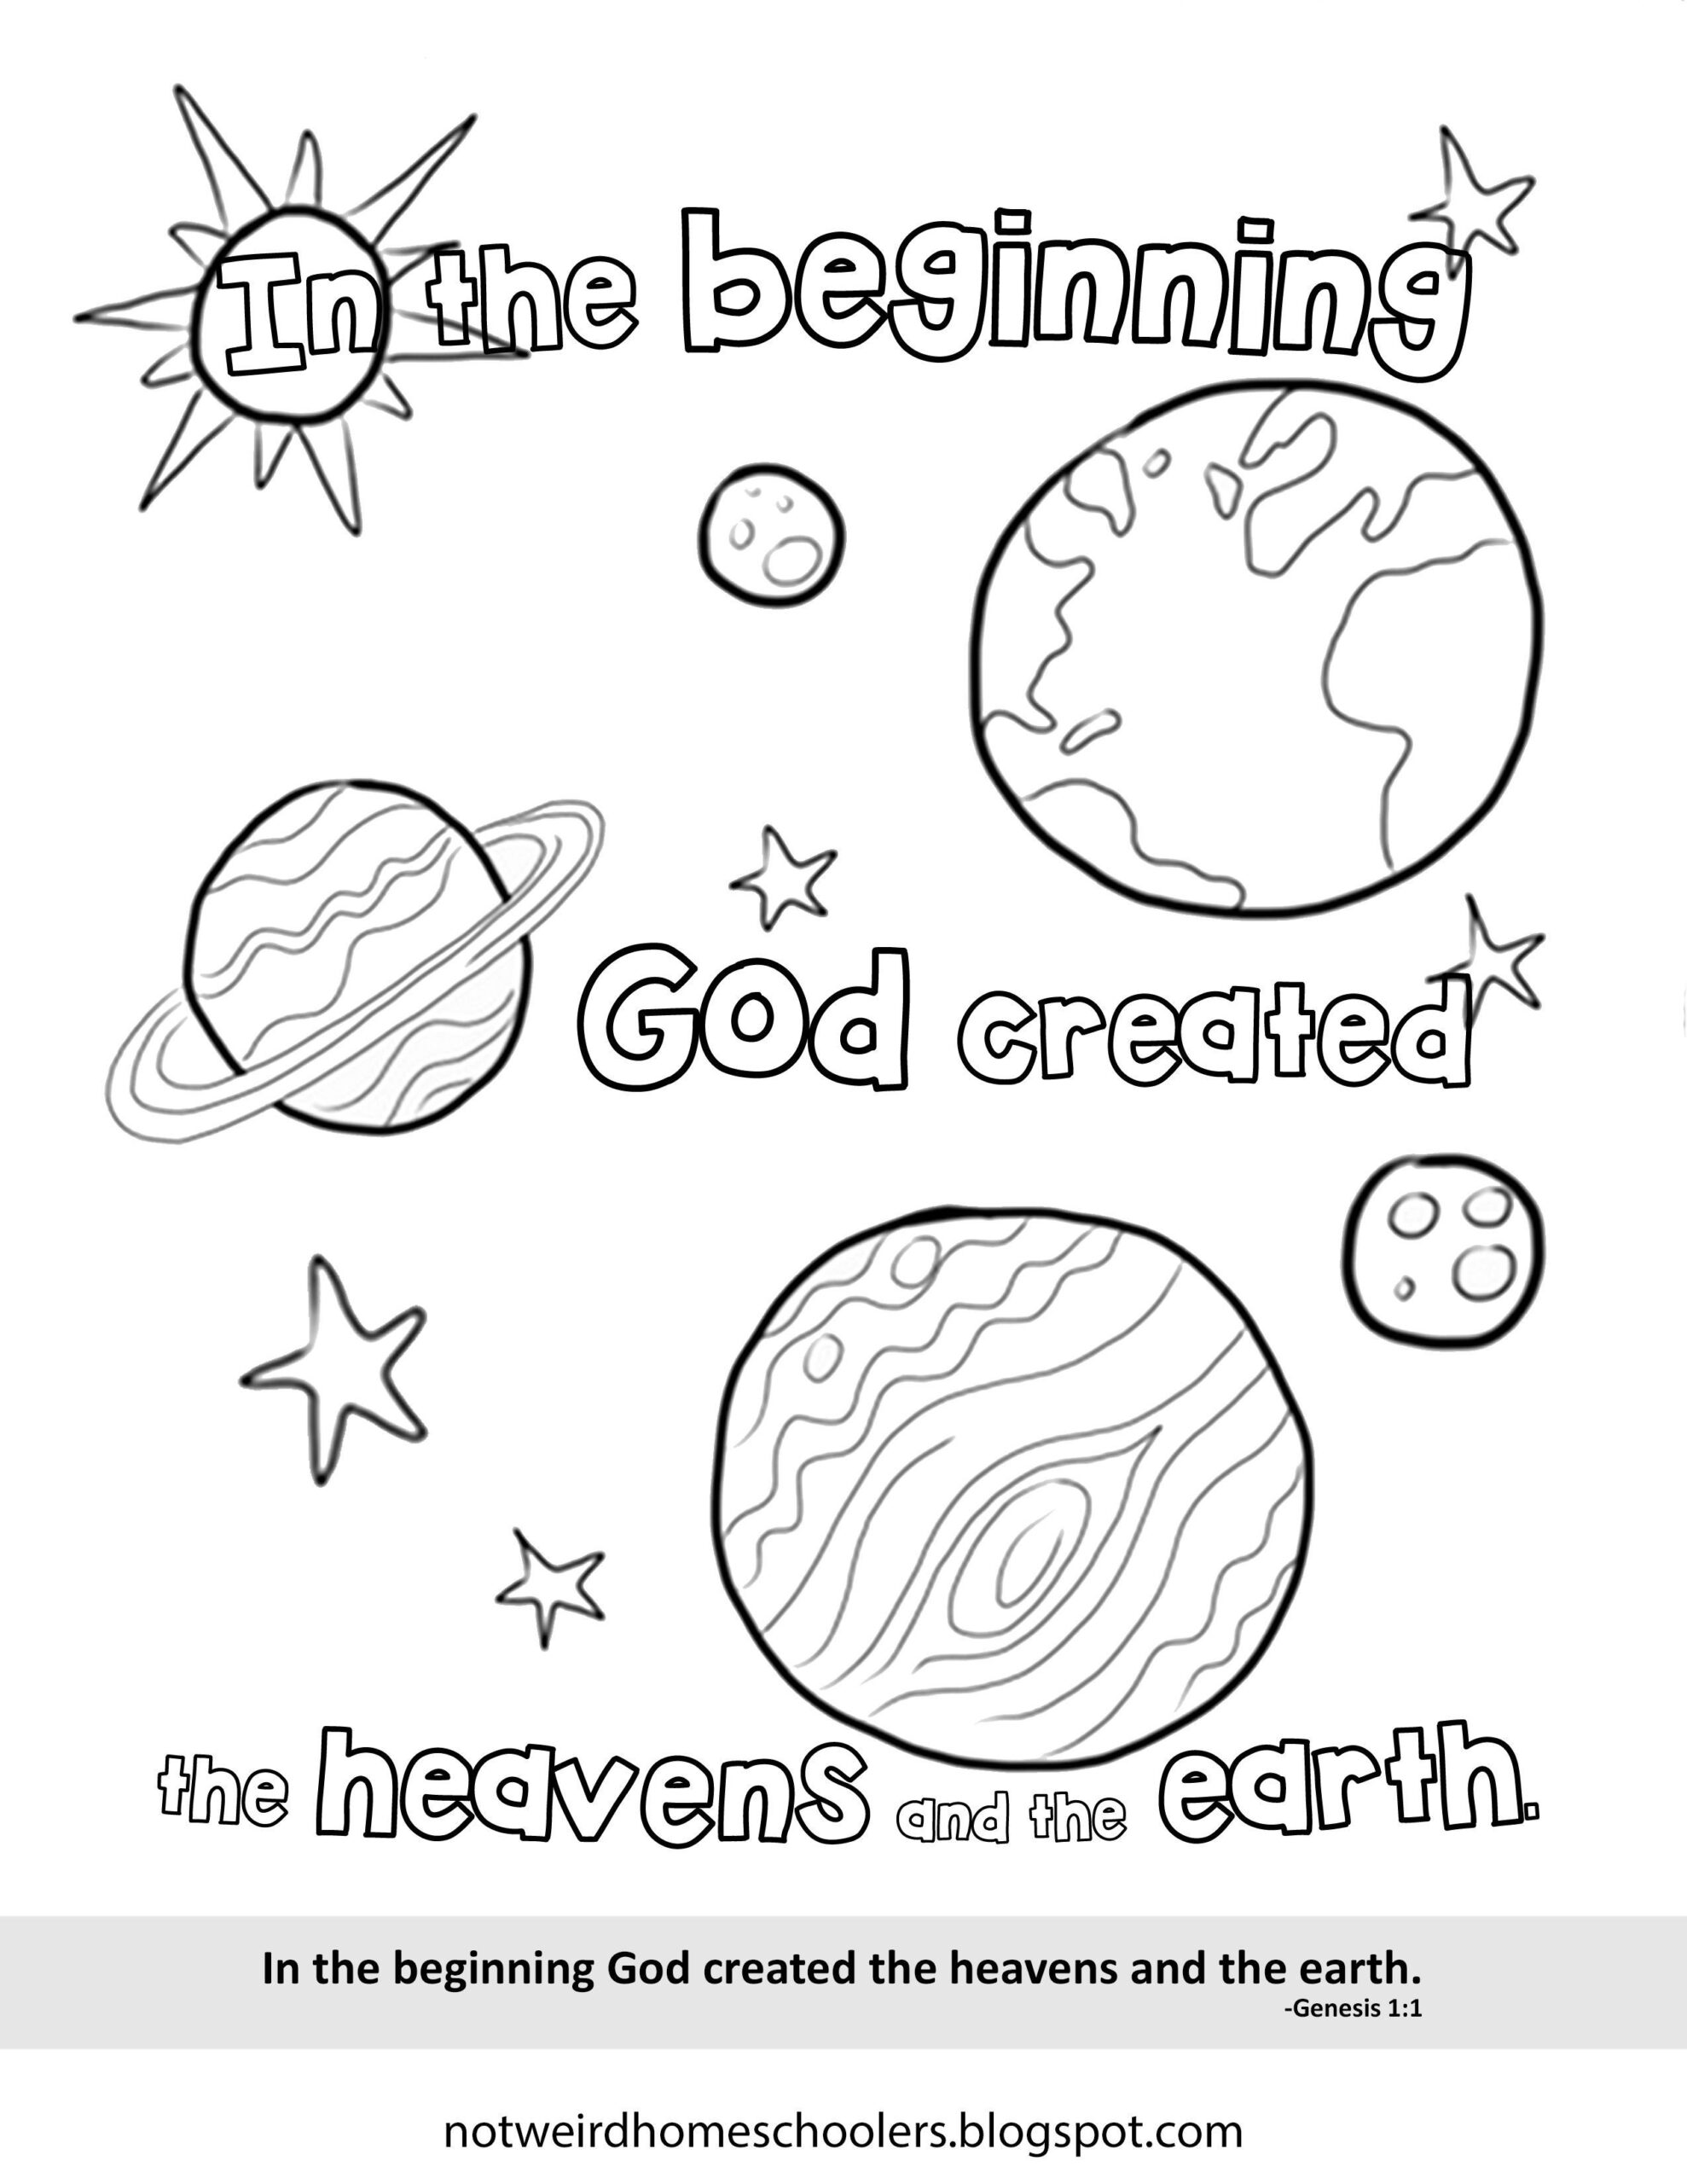 Free Bible Verse Coloring Page For Genesis 1 1 Bible Worksheets 